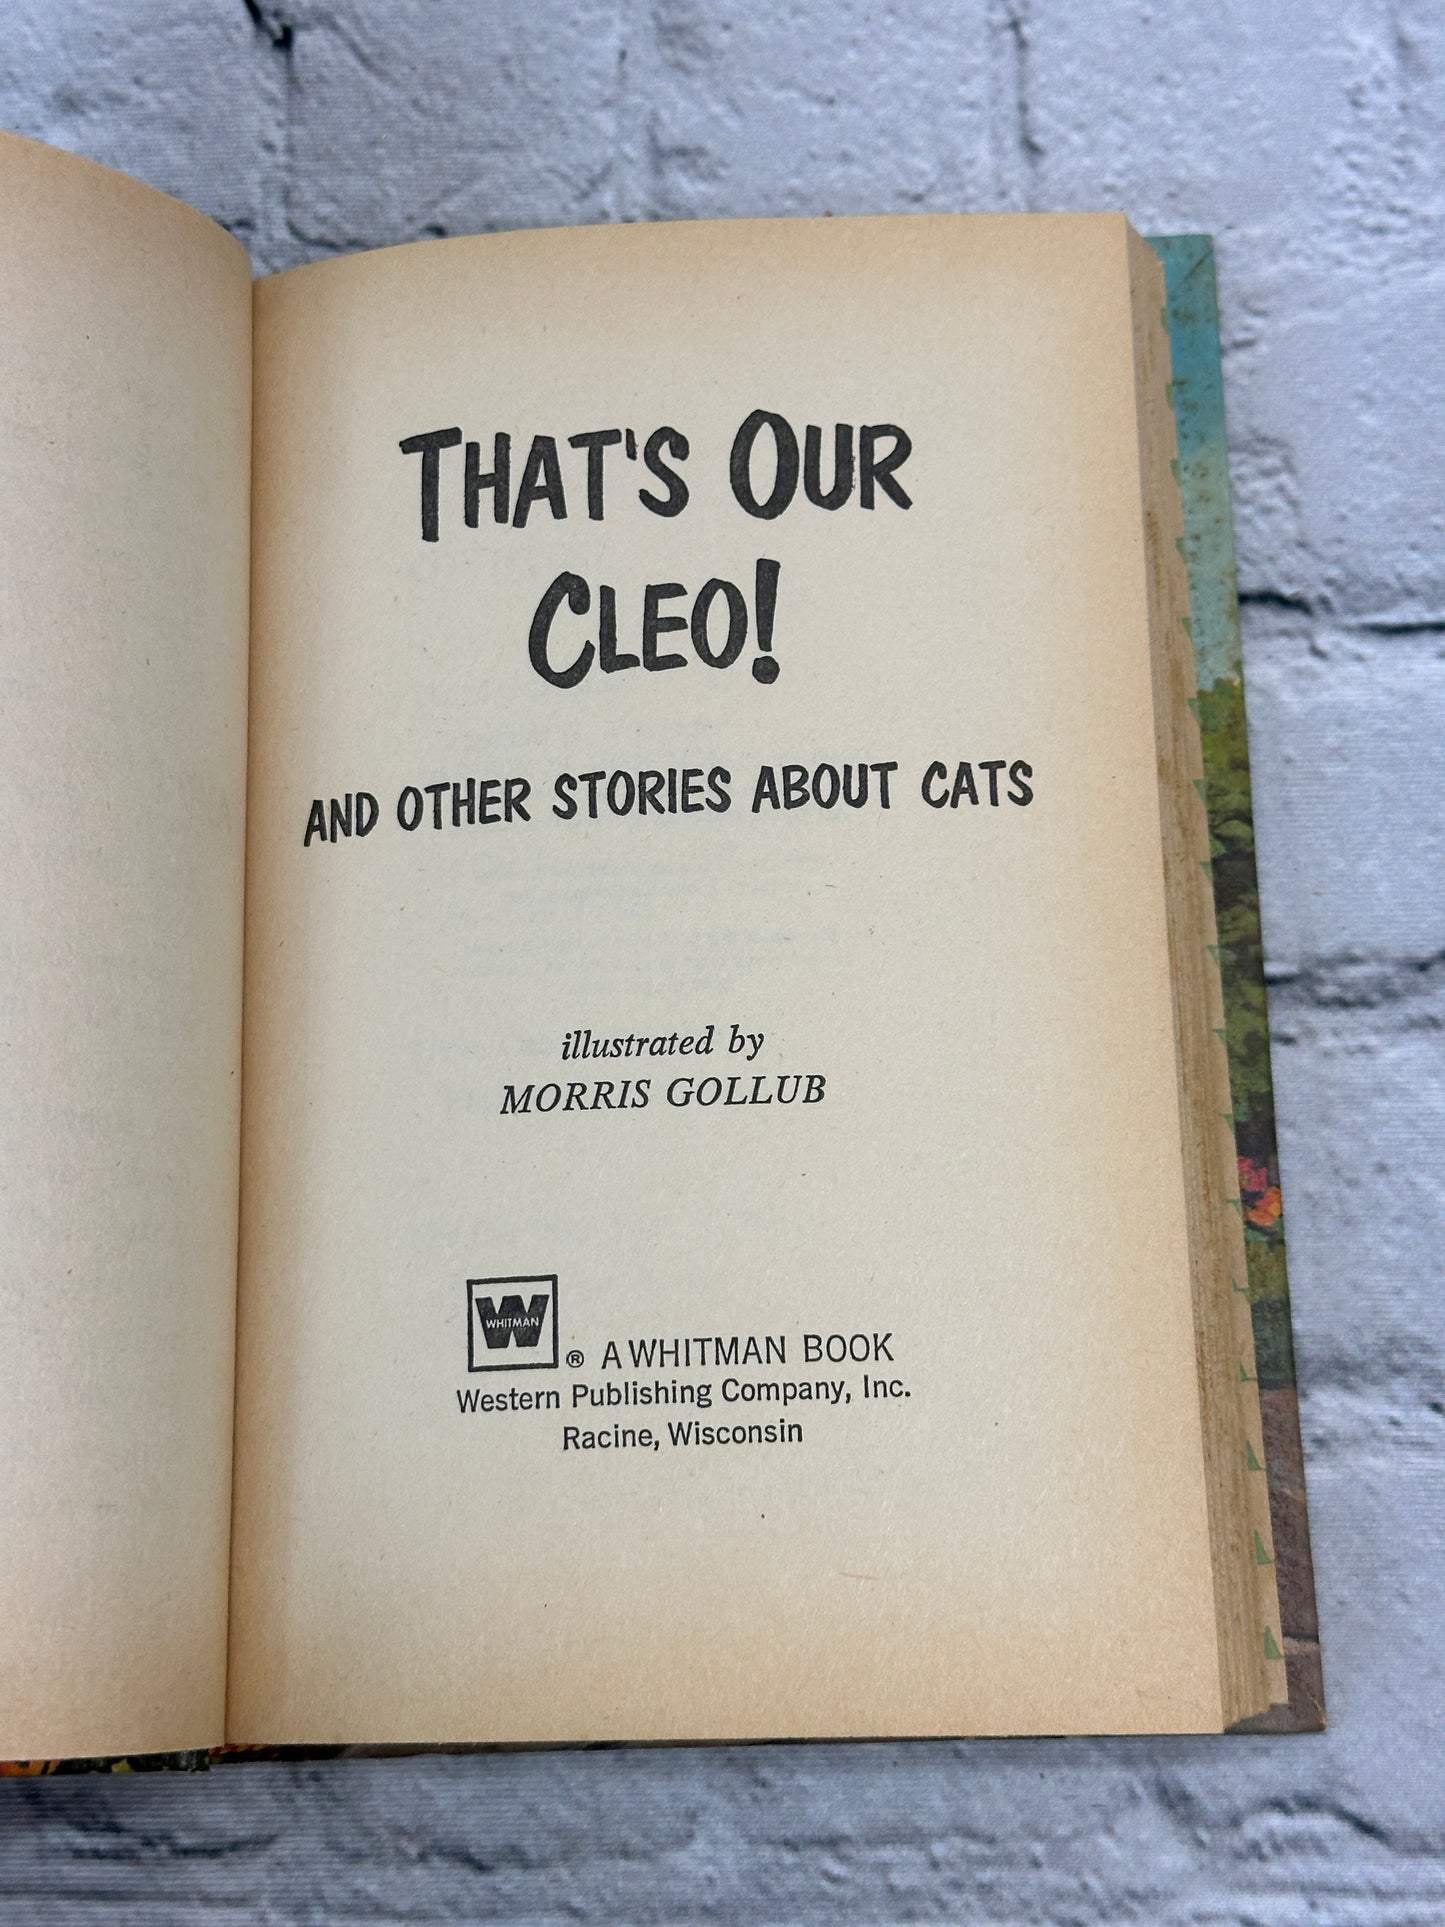 That's Our Cleo & Other Stories About Cats illustrated by Morris Gollub [1966]